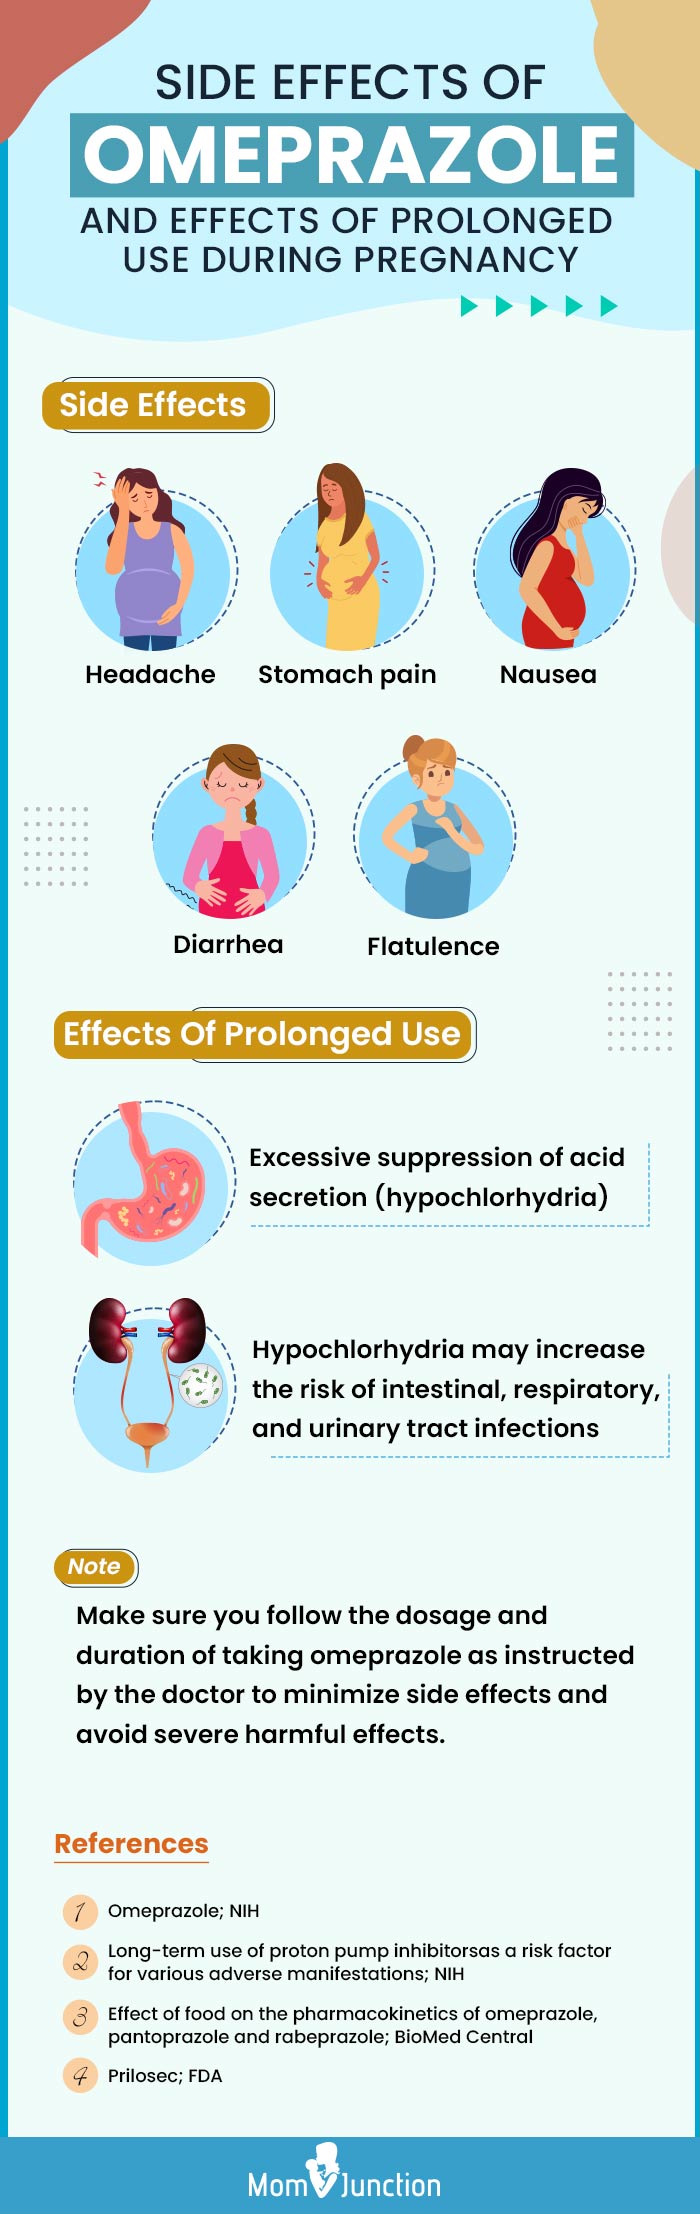 side effects and prolonged use of omeprazole during pregnancy [infographic]